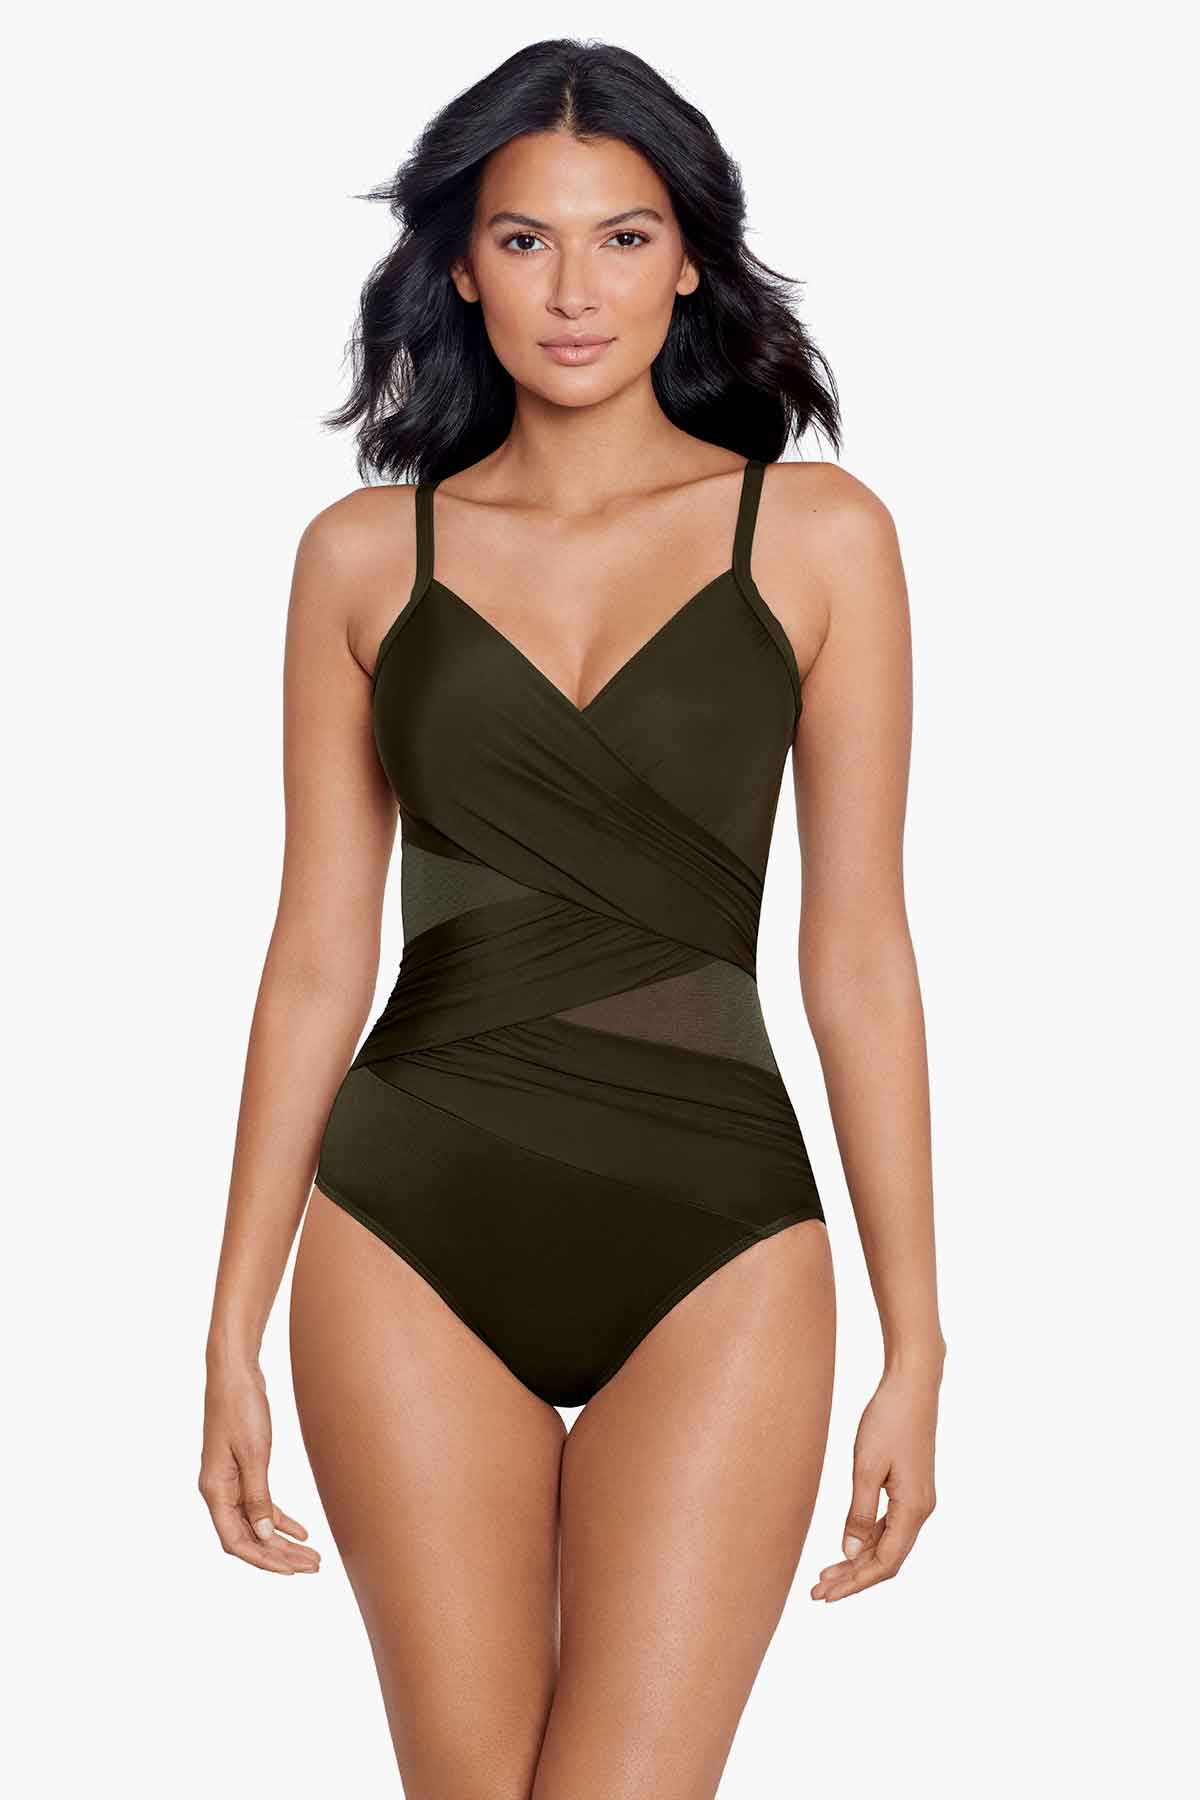 The Best Miraclesuit Shapewear Pieces for Every Outfit - Concept Brands